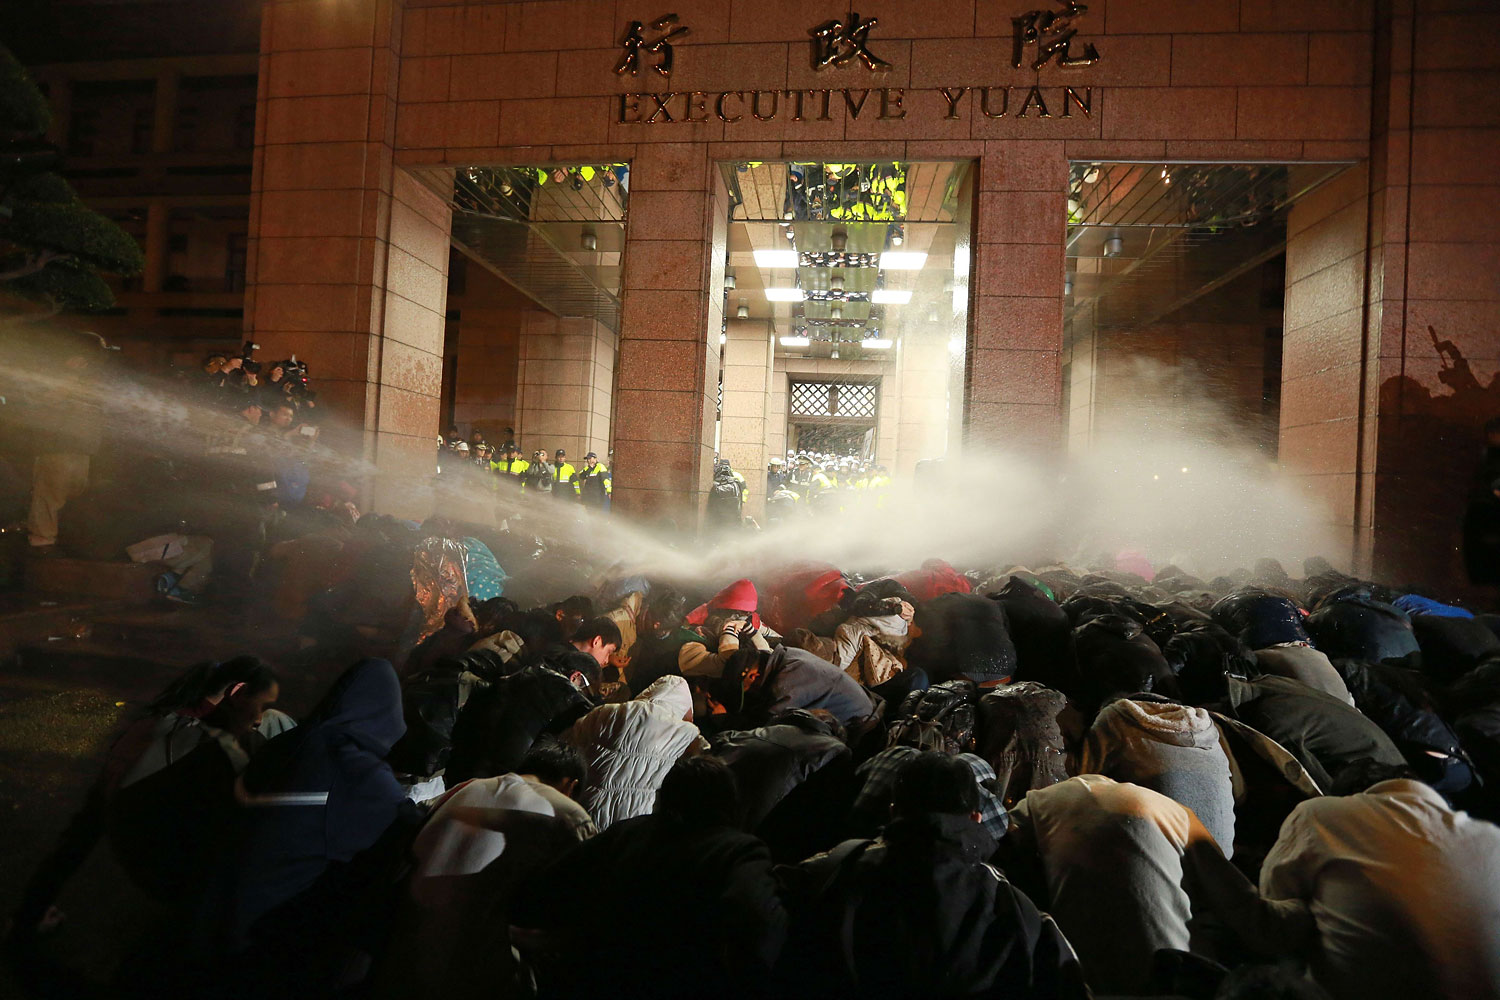 Protesters are sprayed with a water cannon during a demonstration outside the Executive Yuan in Taipei early on March 24, 2014, following Taiwan President Ma Ying-jeou's refusal to scrap a contentious trade agreement with China.